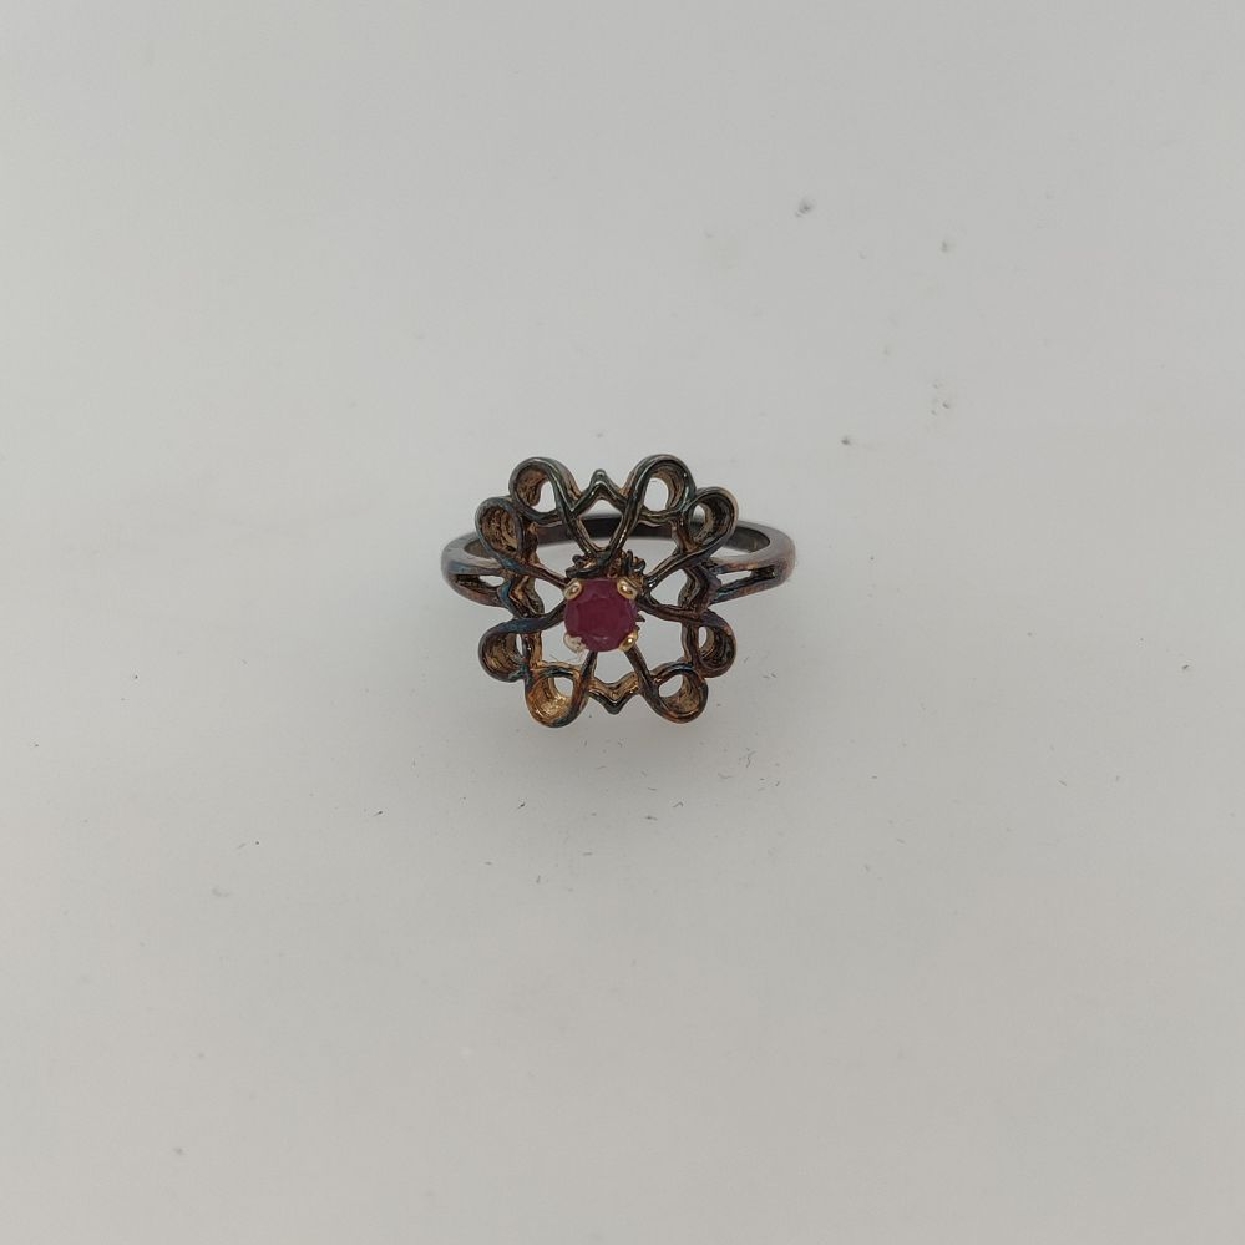 Sterling Silver Avon Ring with Filigree Detail and Ruby Stone Size 7.75